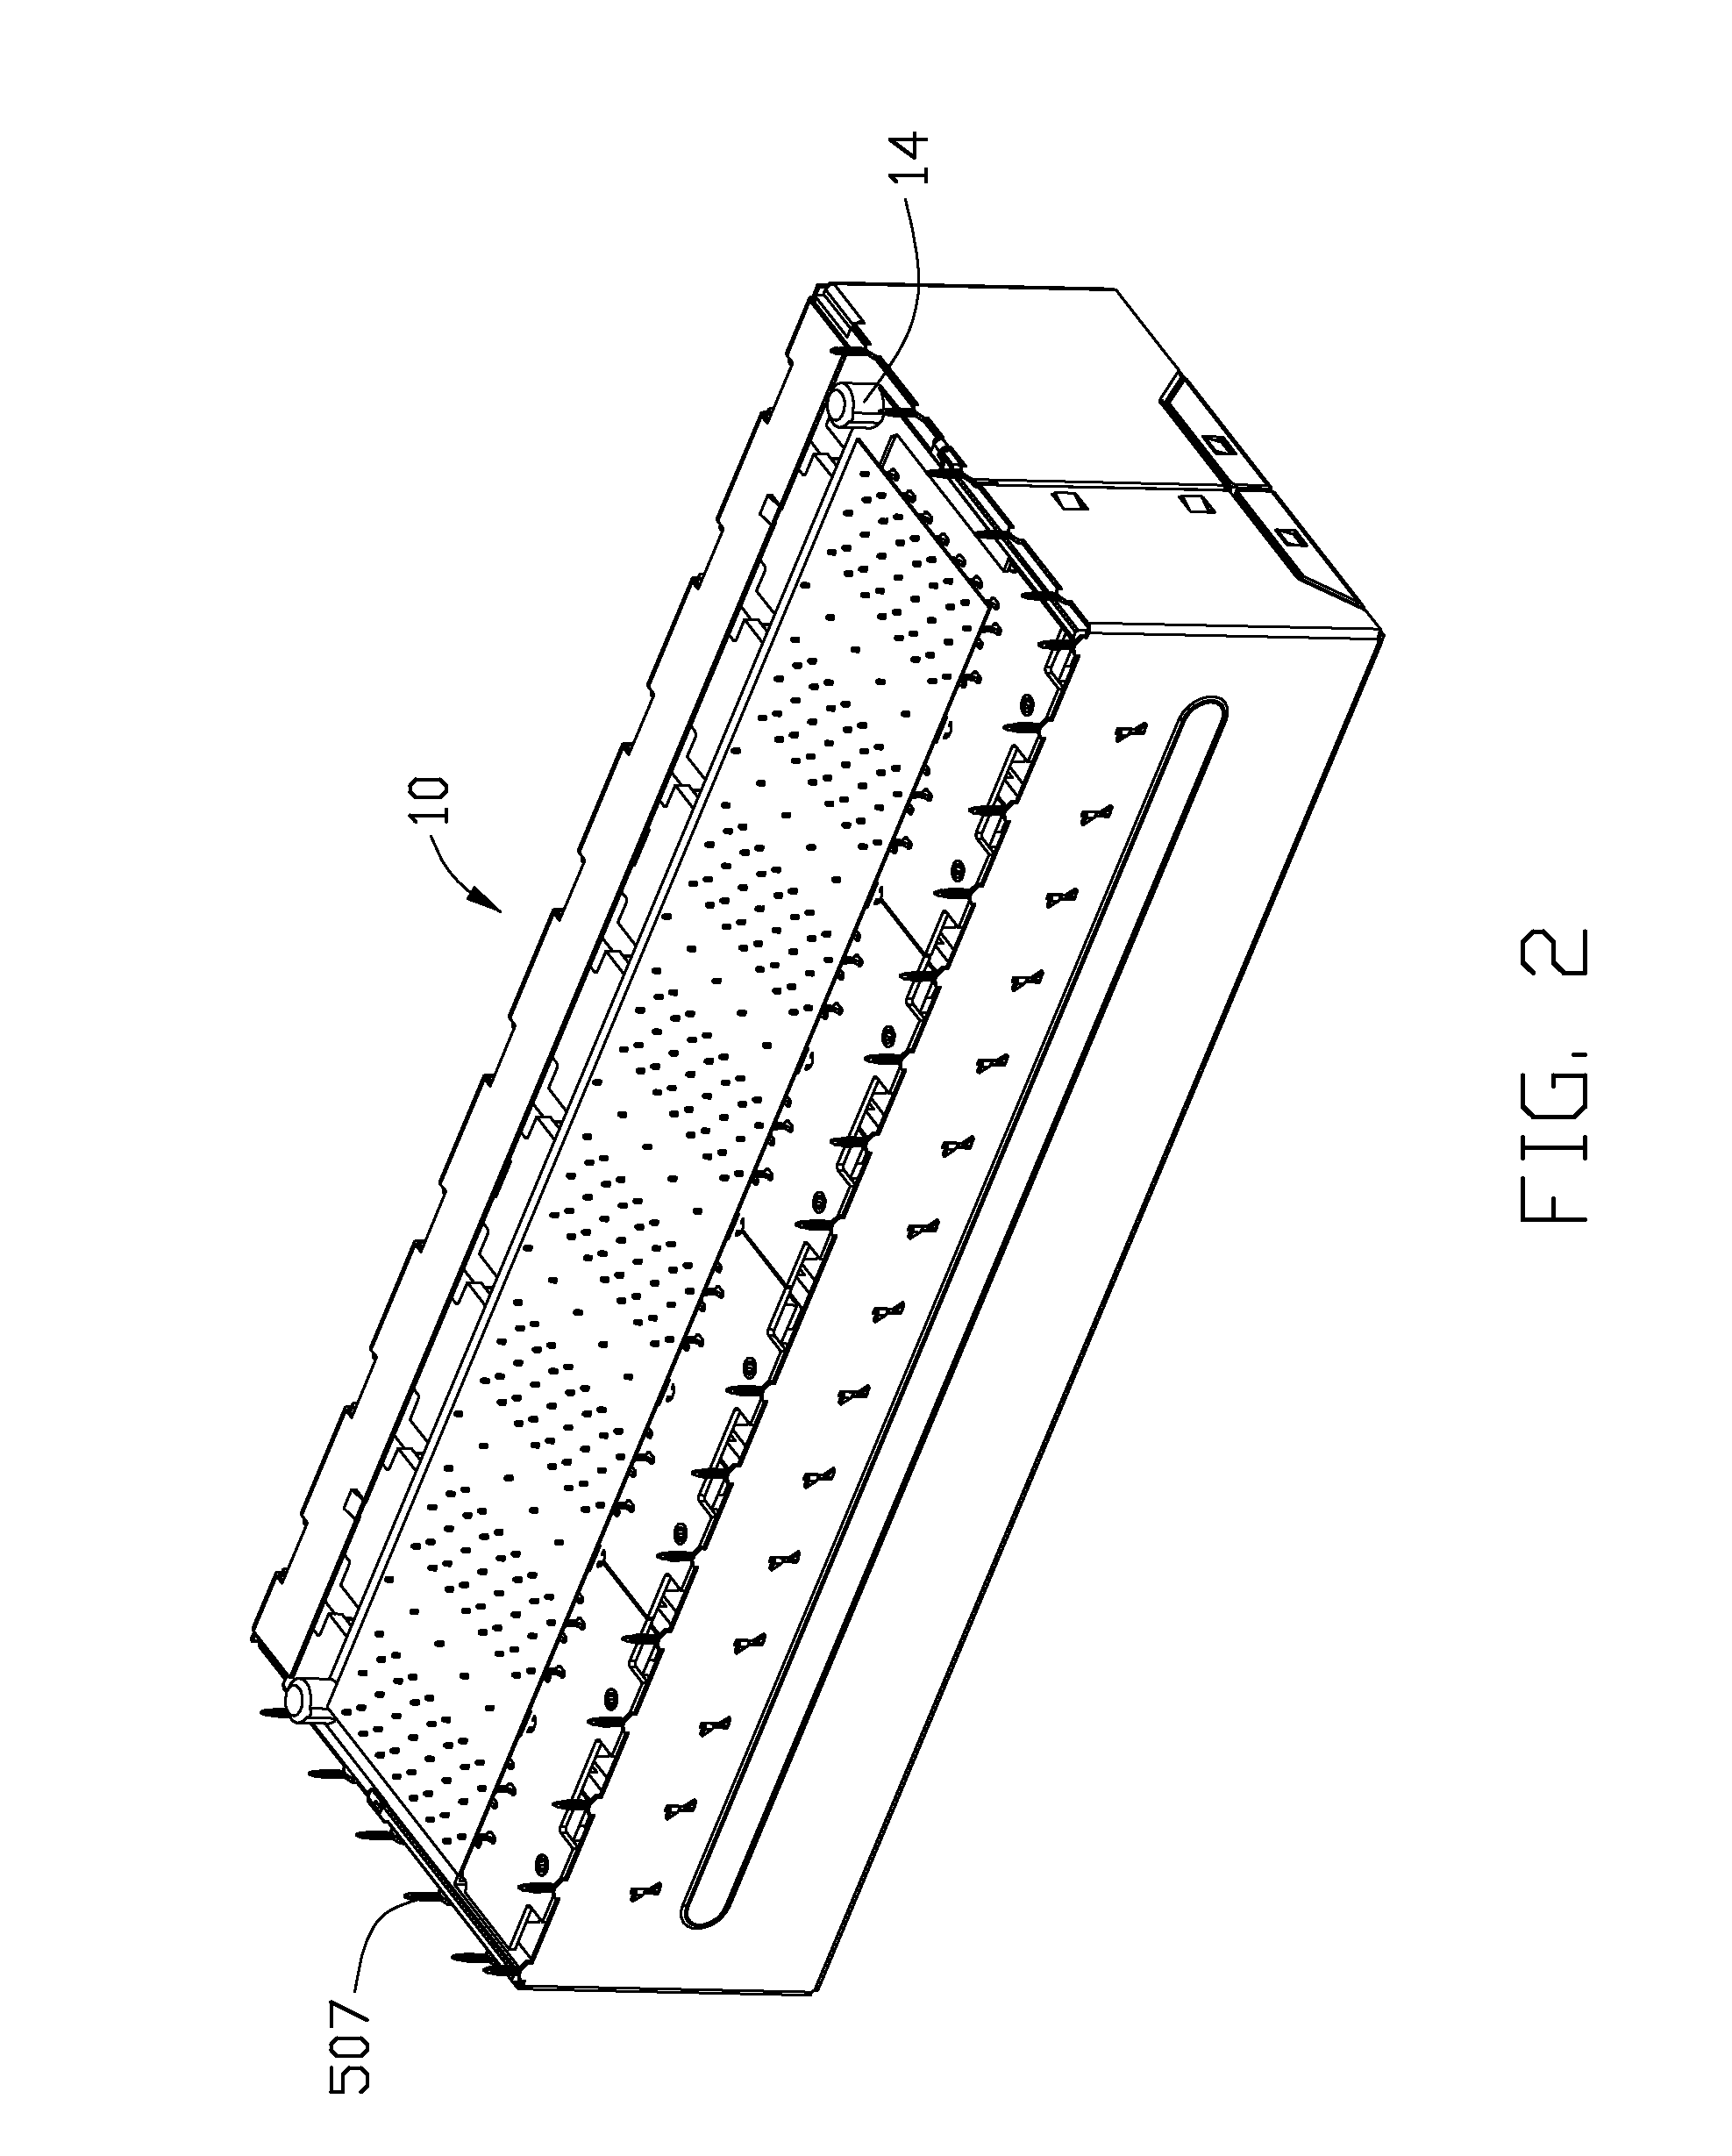 Electrical connector having position fixer for conductive terminals